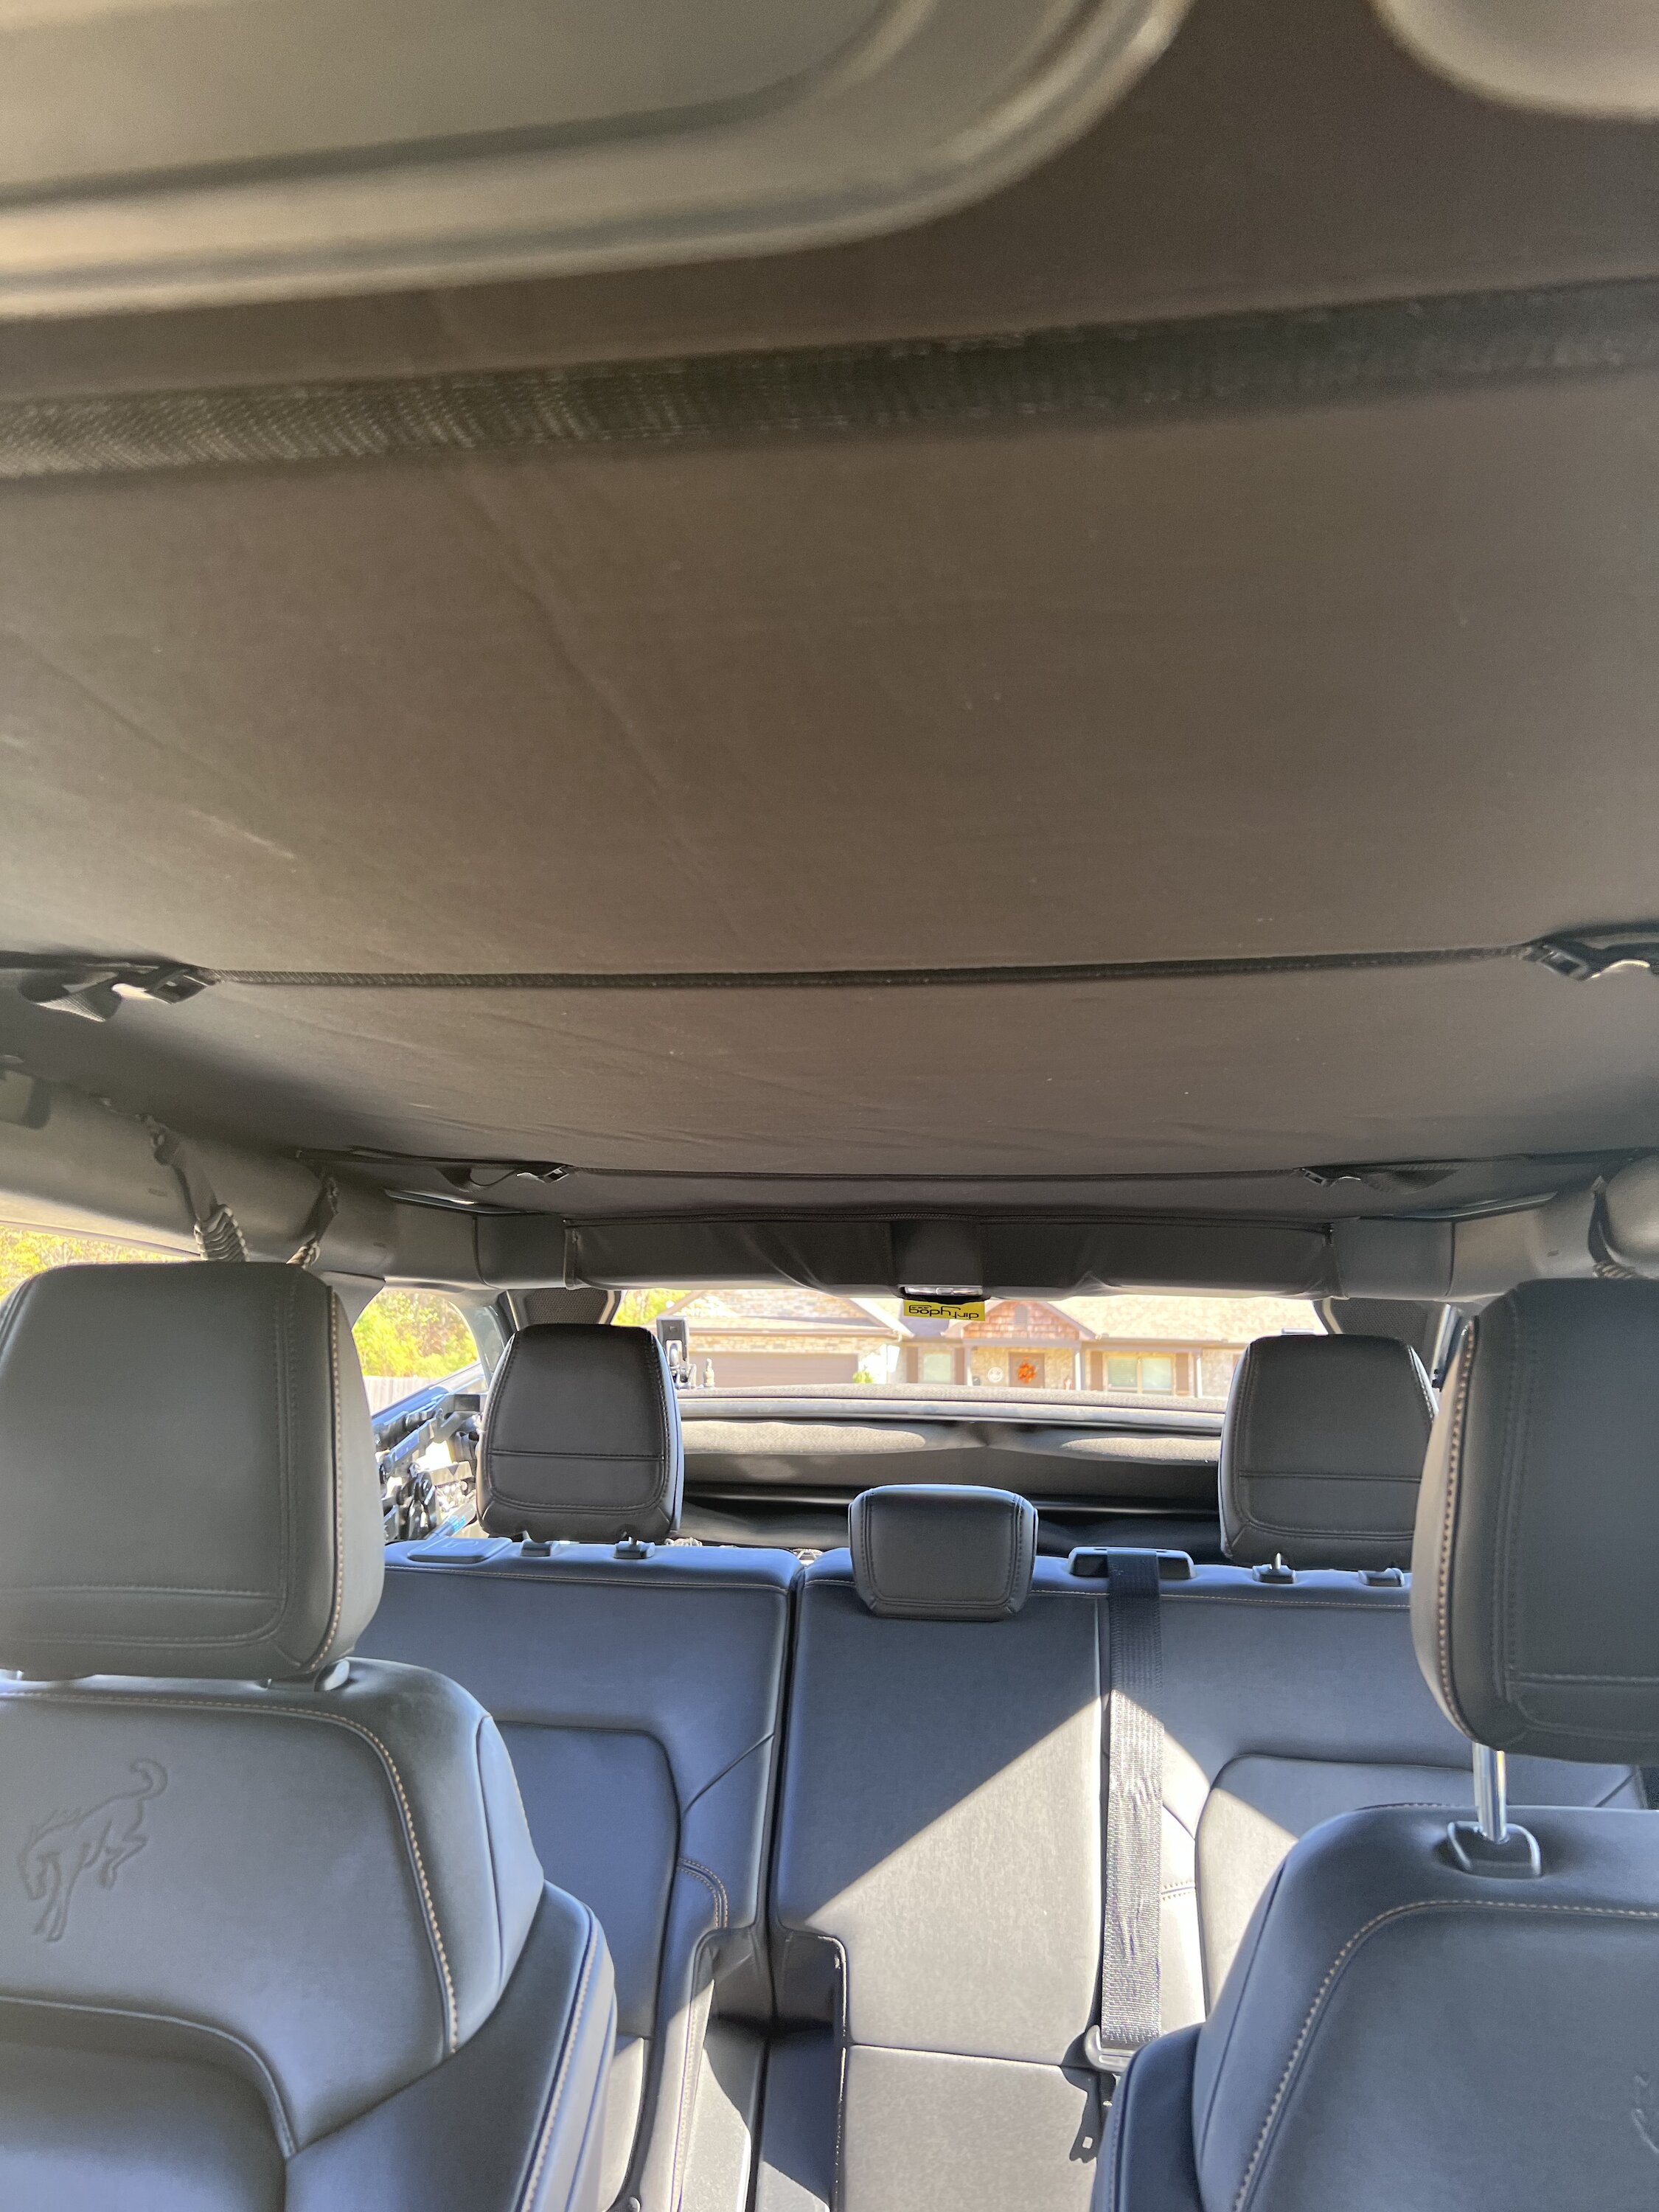 Ford Bronco New product release: Dirtydog 4x4 Headliner for Soft Top 2C2C9314-FEC6-487F-9AE0-9CB689E64375